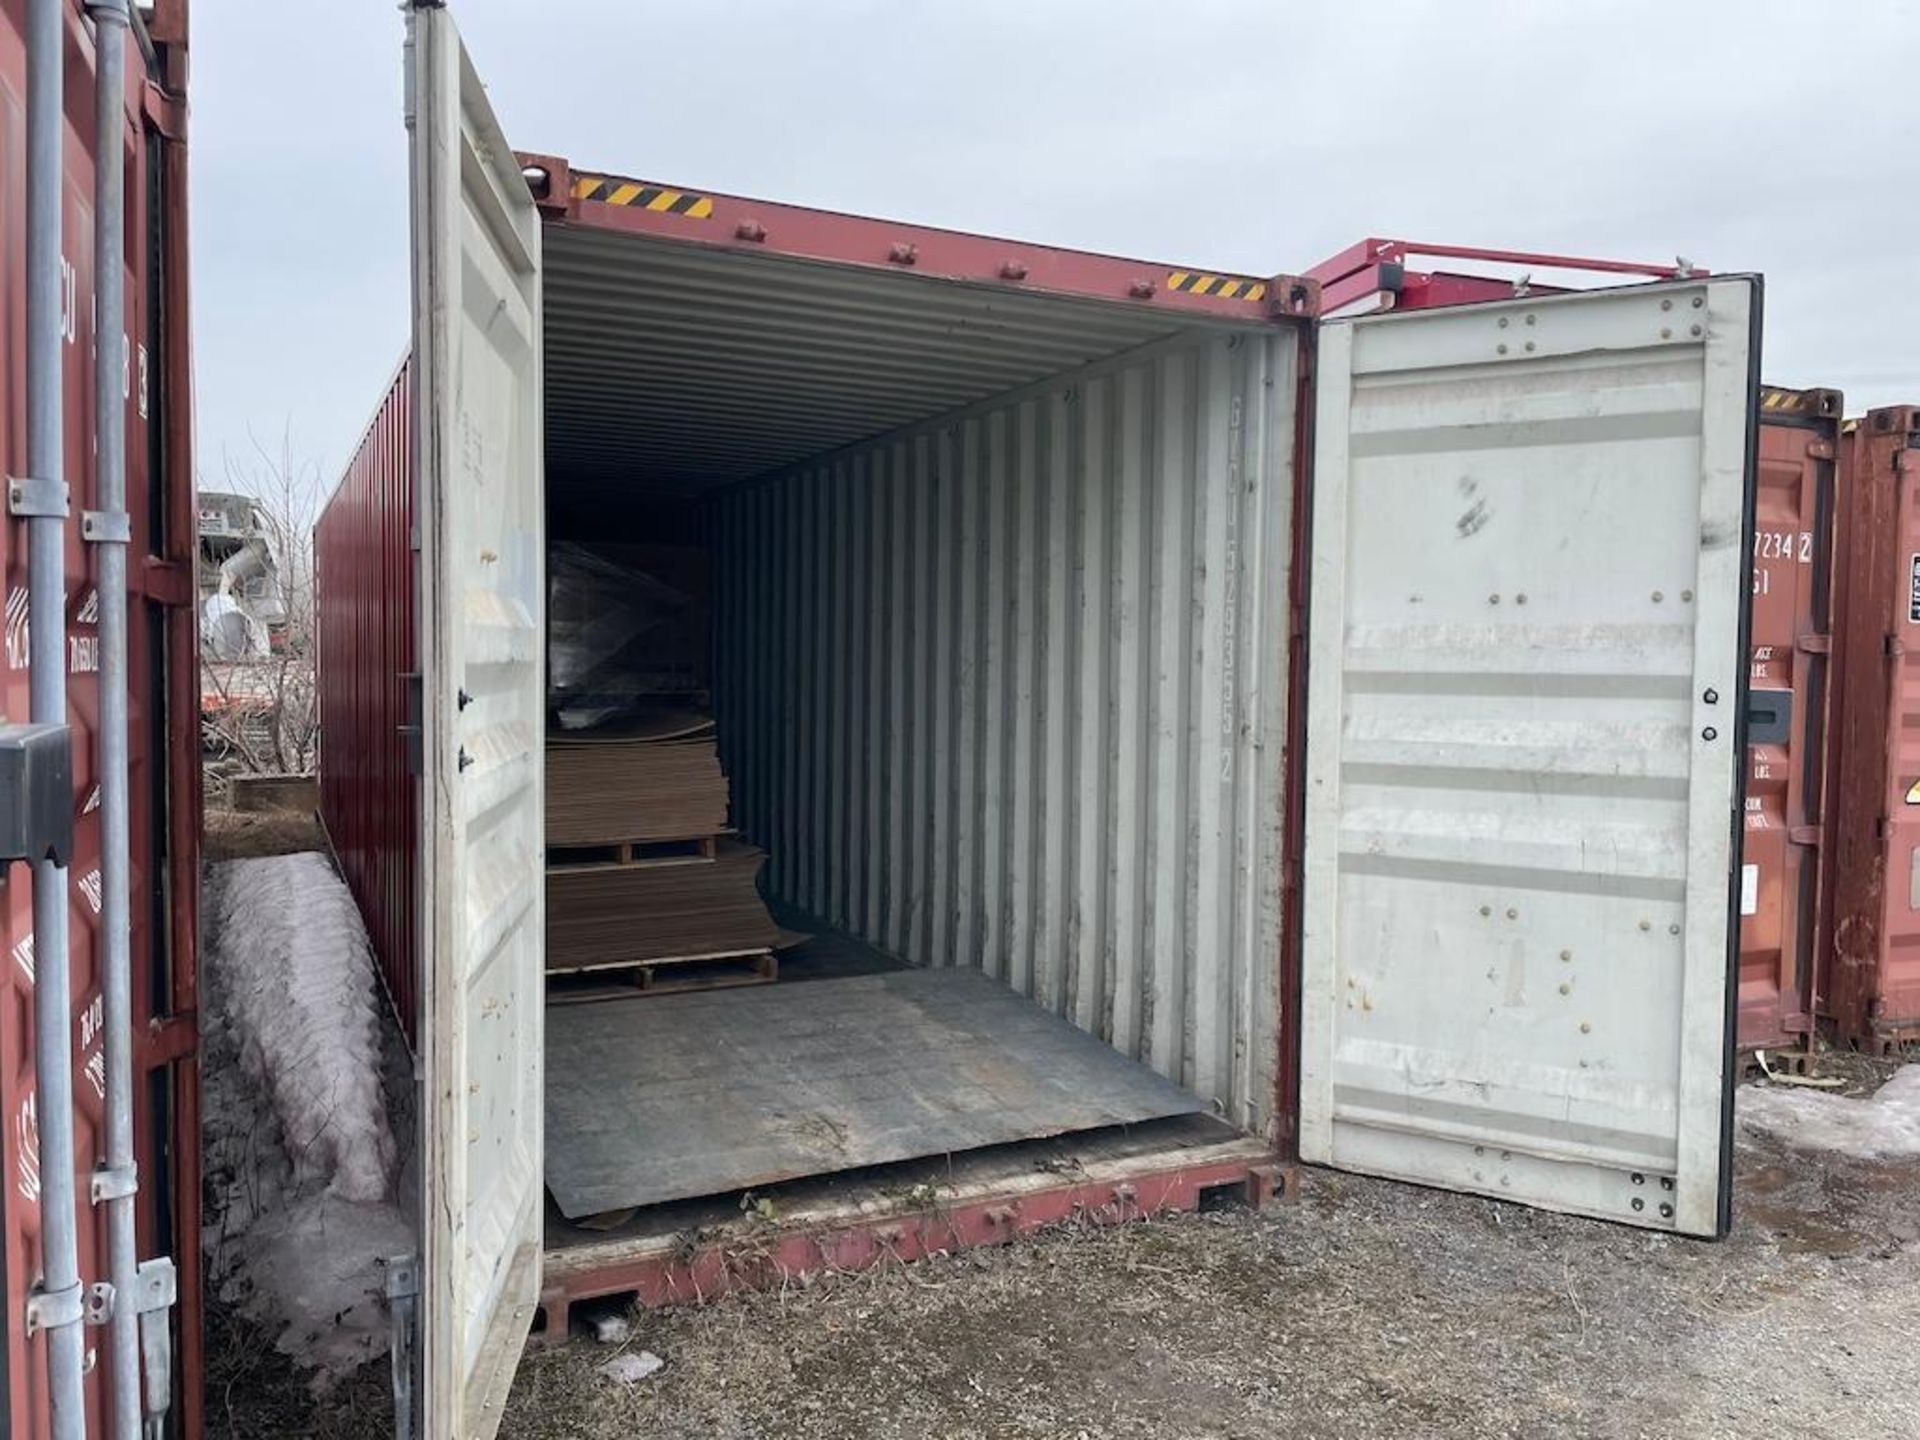 40 FT SEA CONTAINER, EXCLUDING CONTENTS, DELAYED PICK UP UNTIL MAY 13 [3] [TROIS RIVIERES] *PLEASE N